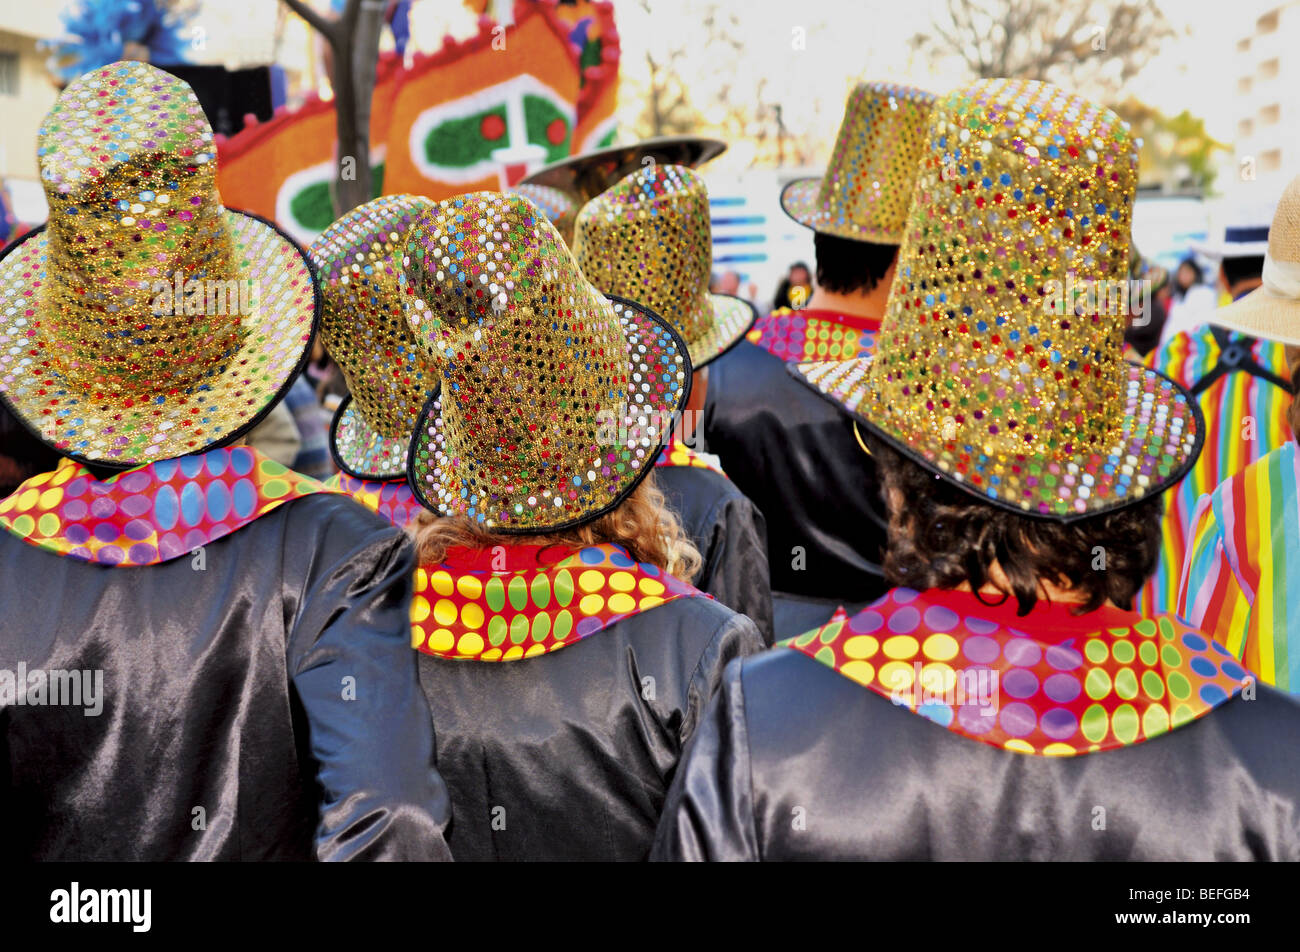 Portugal, Algarve: Participants of the Carnival Parade of Loulé Stock Photo